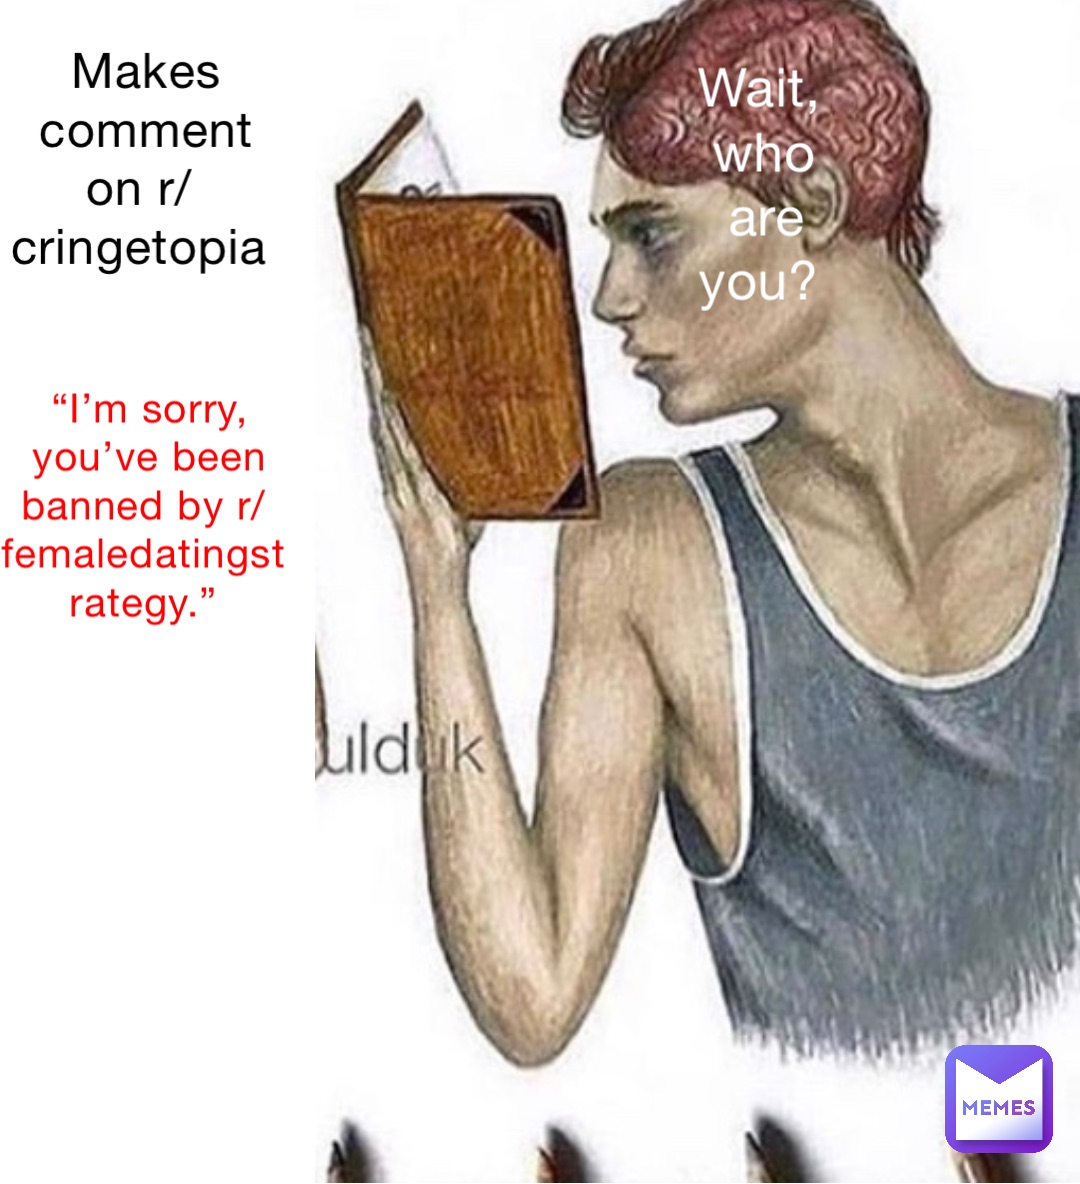 Makes comment on r/cringetopia “I’m sorry, you’ve been banned by r/femaledatingstrategy.” Wait, who are you?